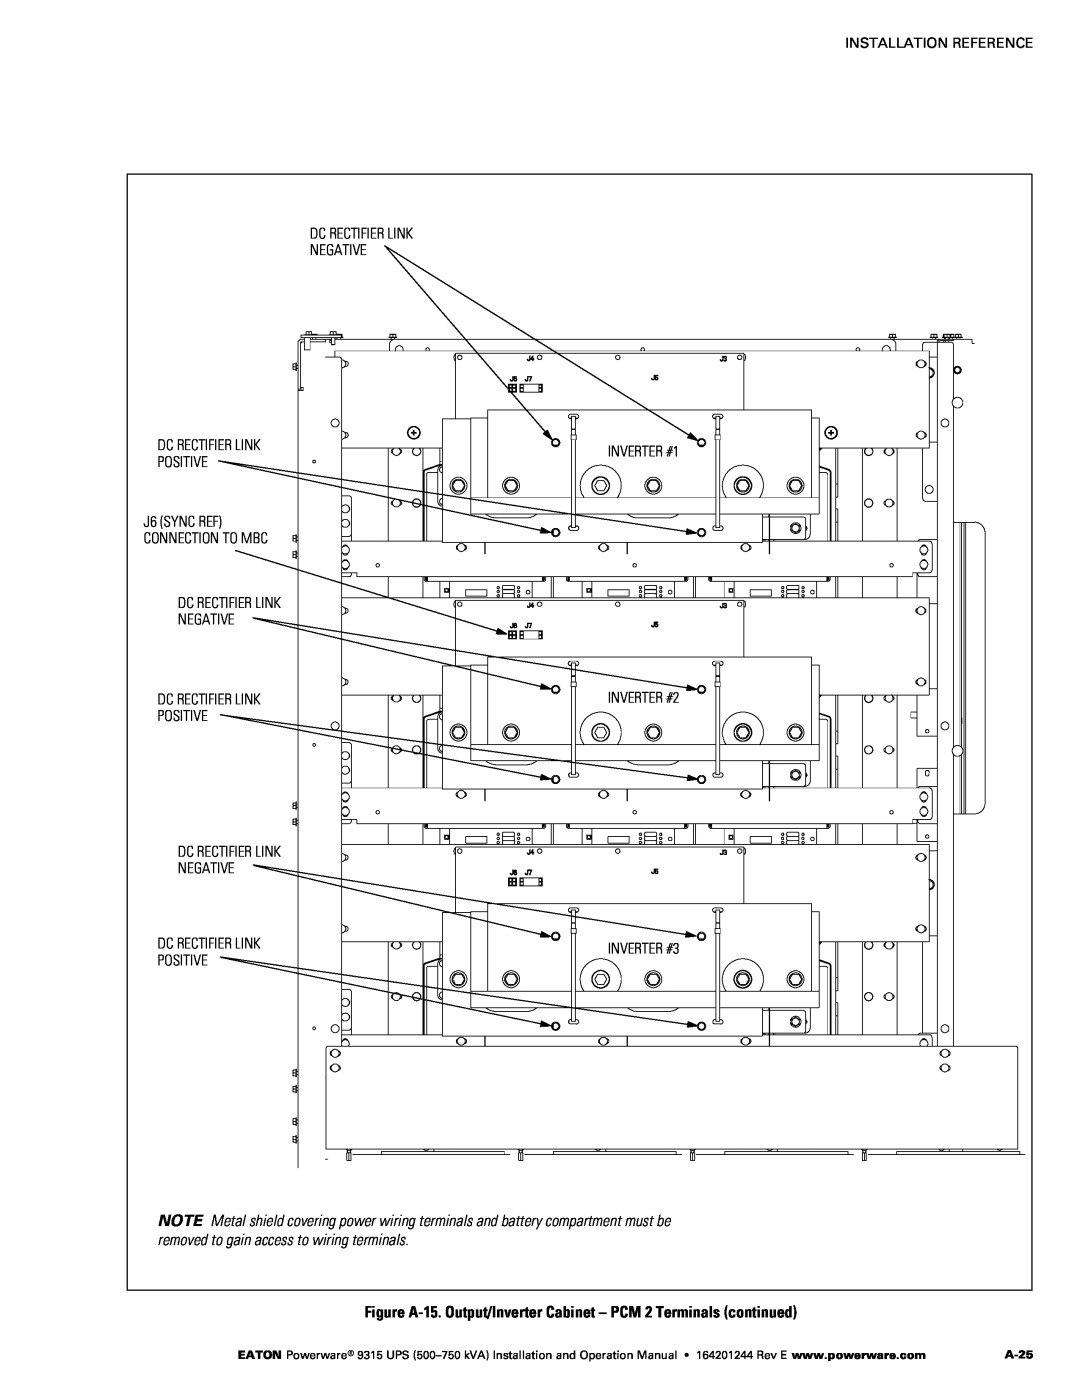 Powerware Powerware 9315 operation manual Figure A‐15. Output/Inverter Cabinet - PCM 2 Terminals continued, A-25 